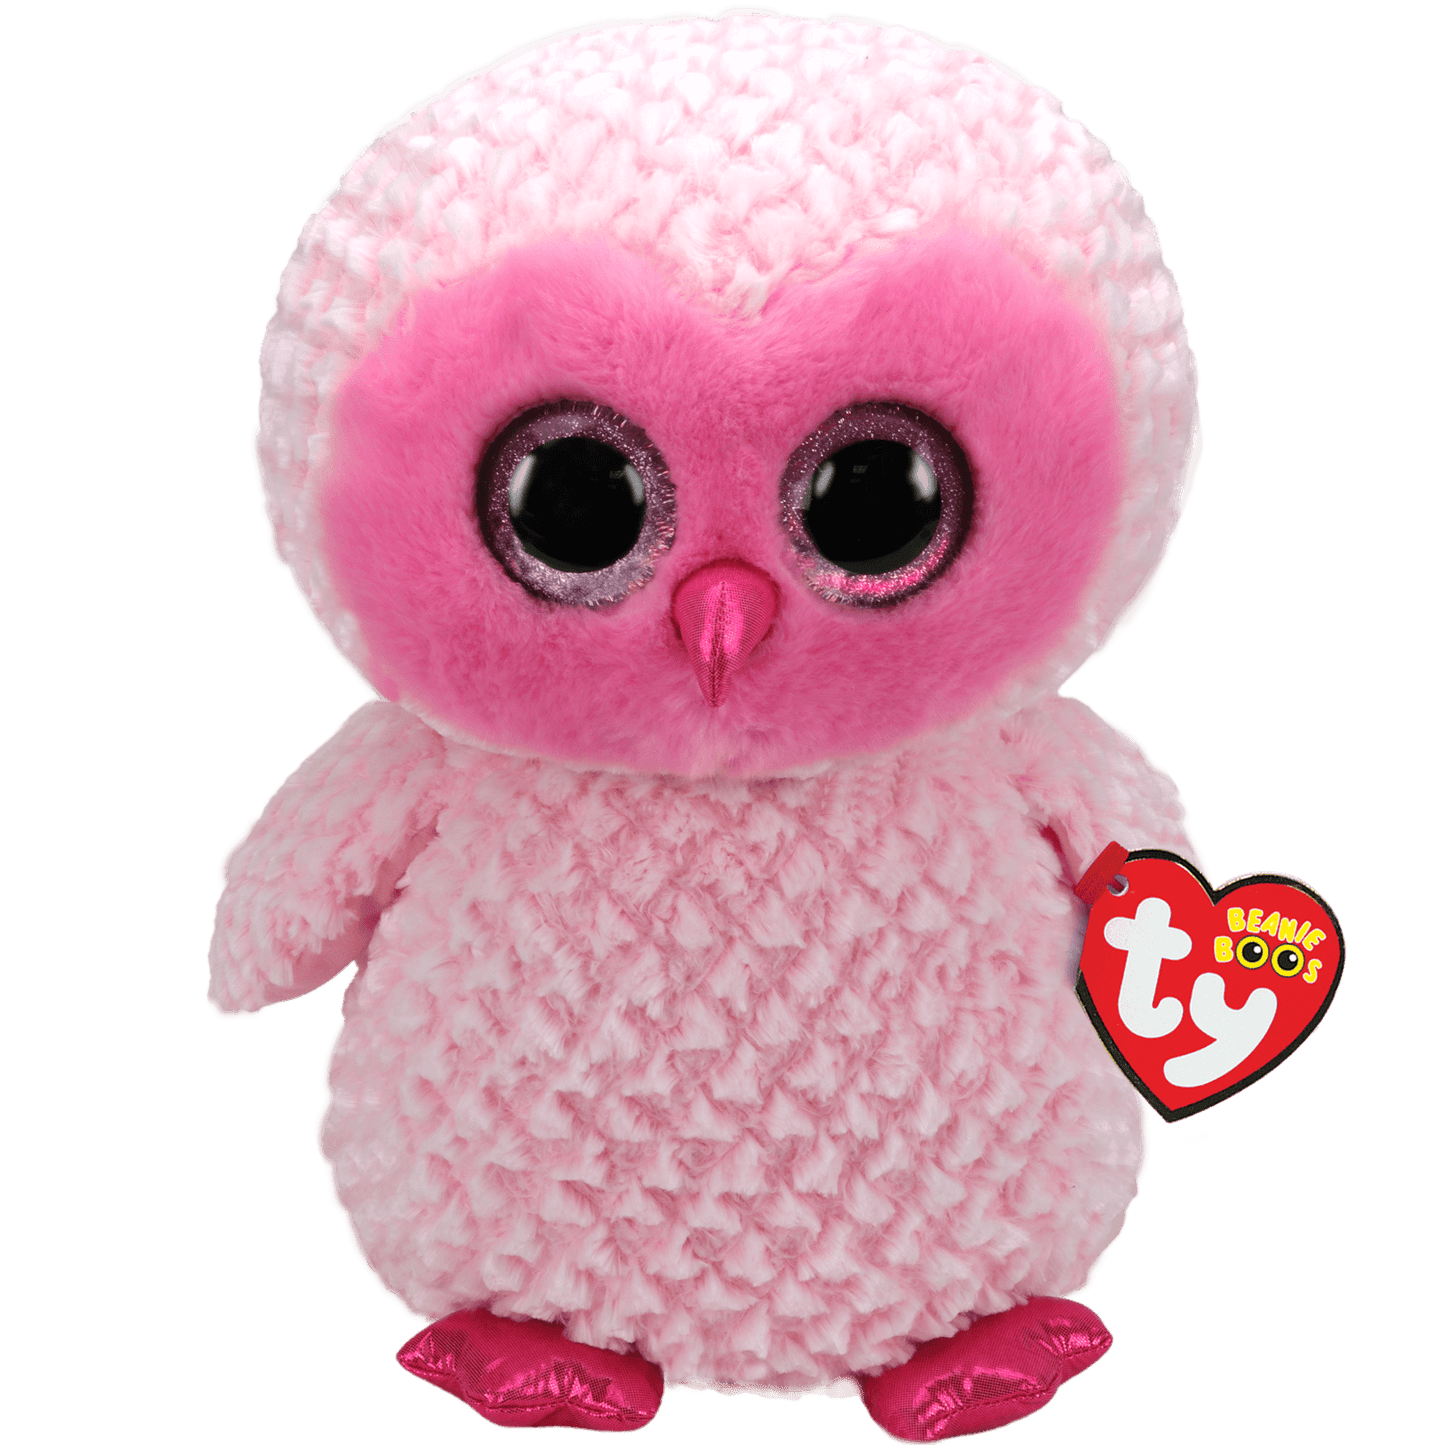 Ty Beanie Boos Twiggy Stuffed Animal Pink Owl - Large Boo Plush Toy, 16 inches